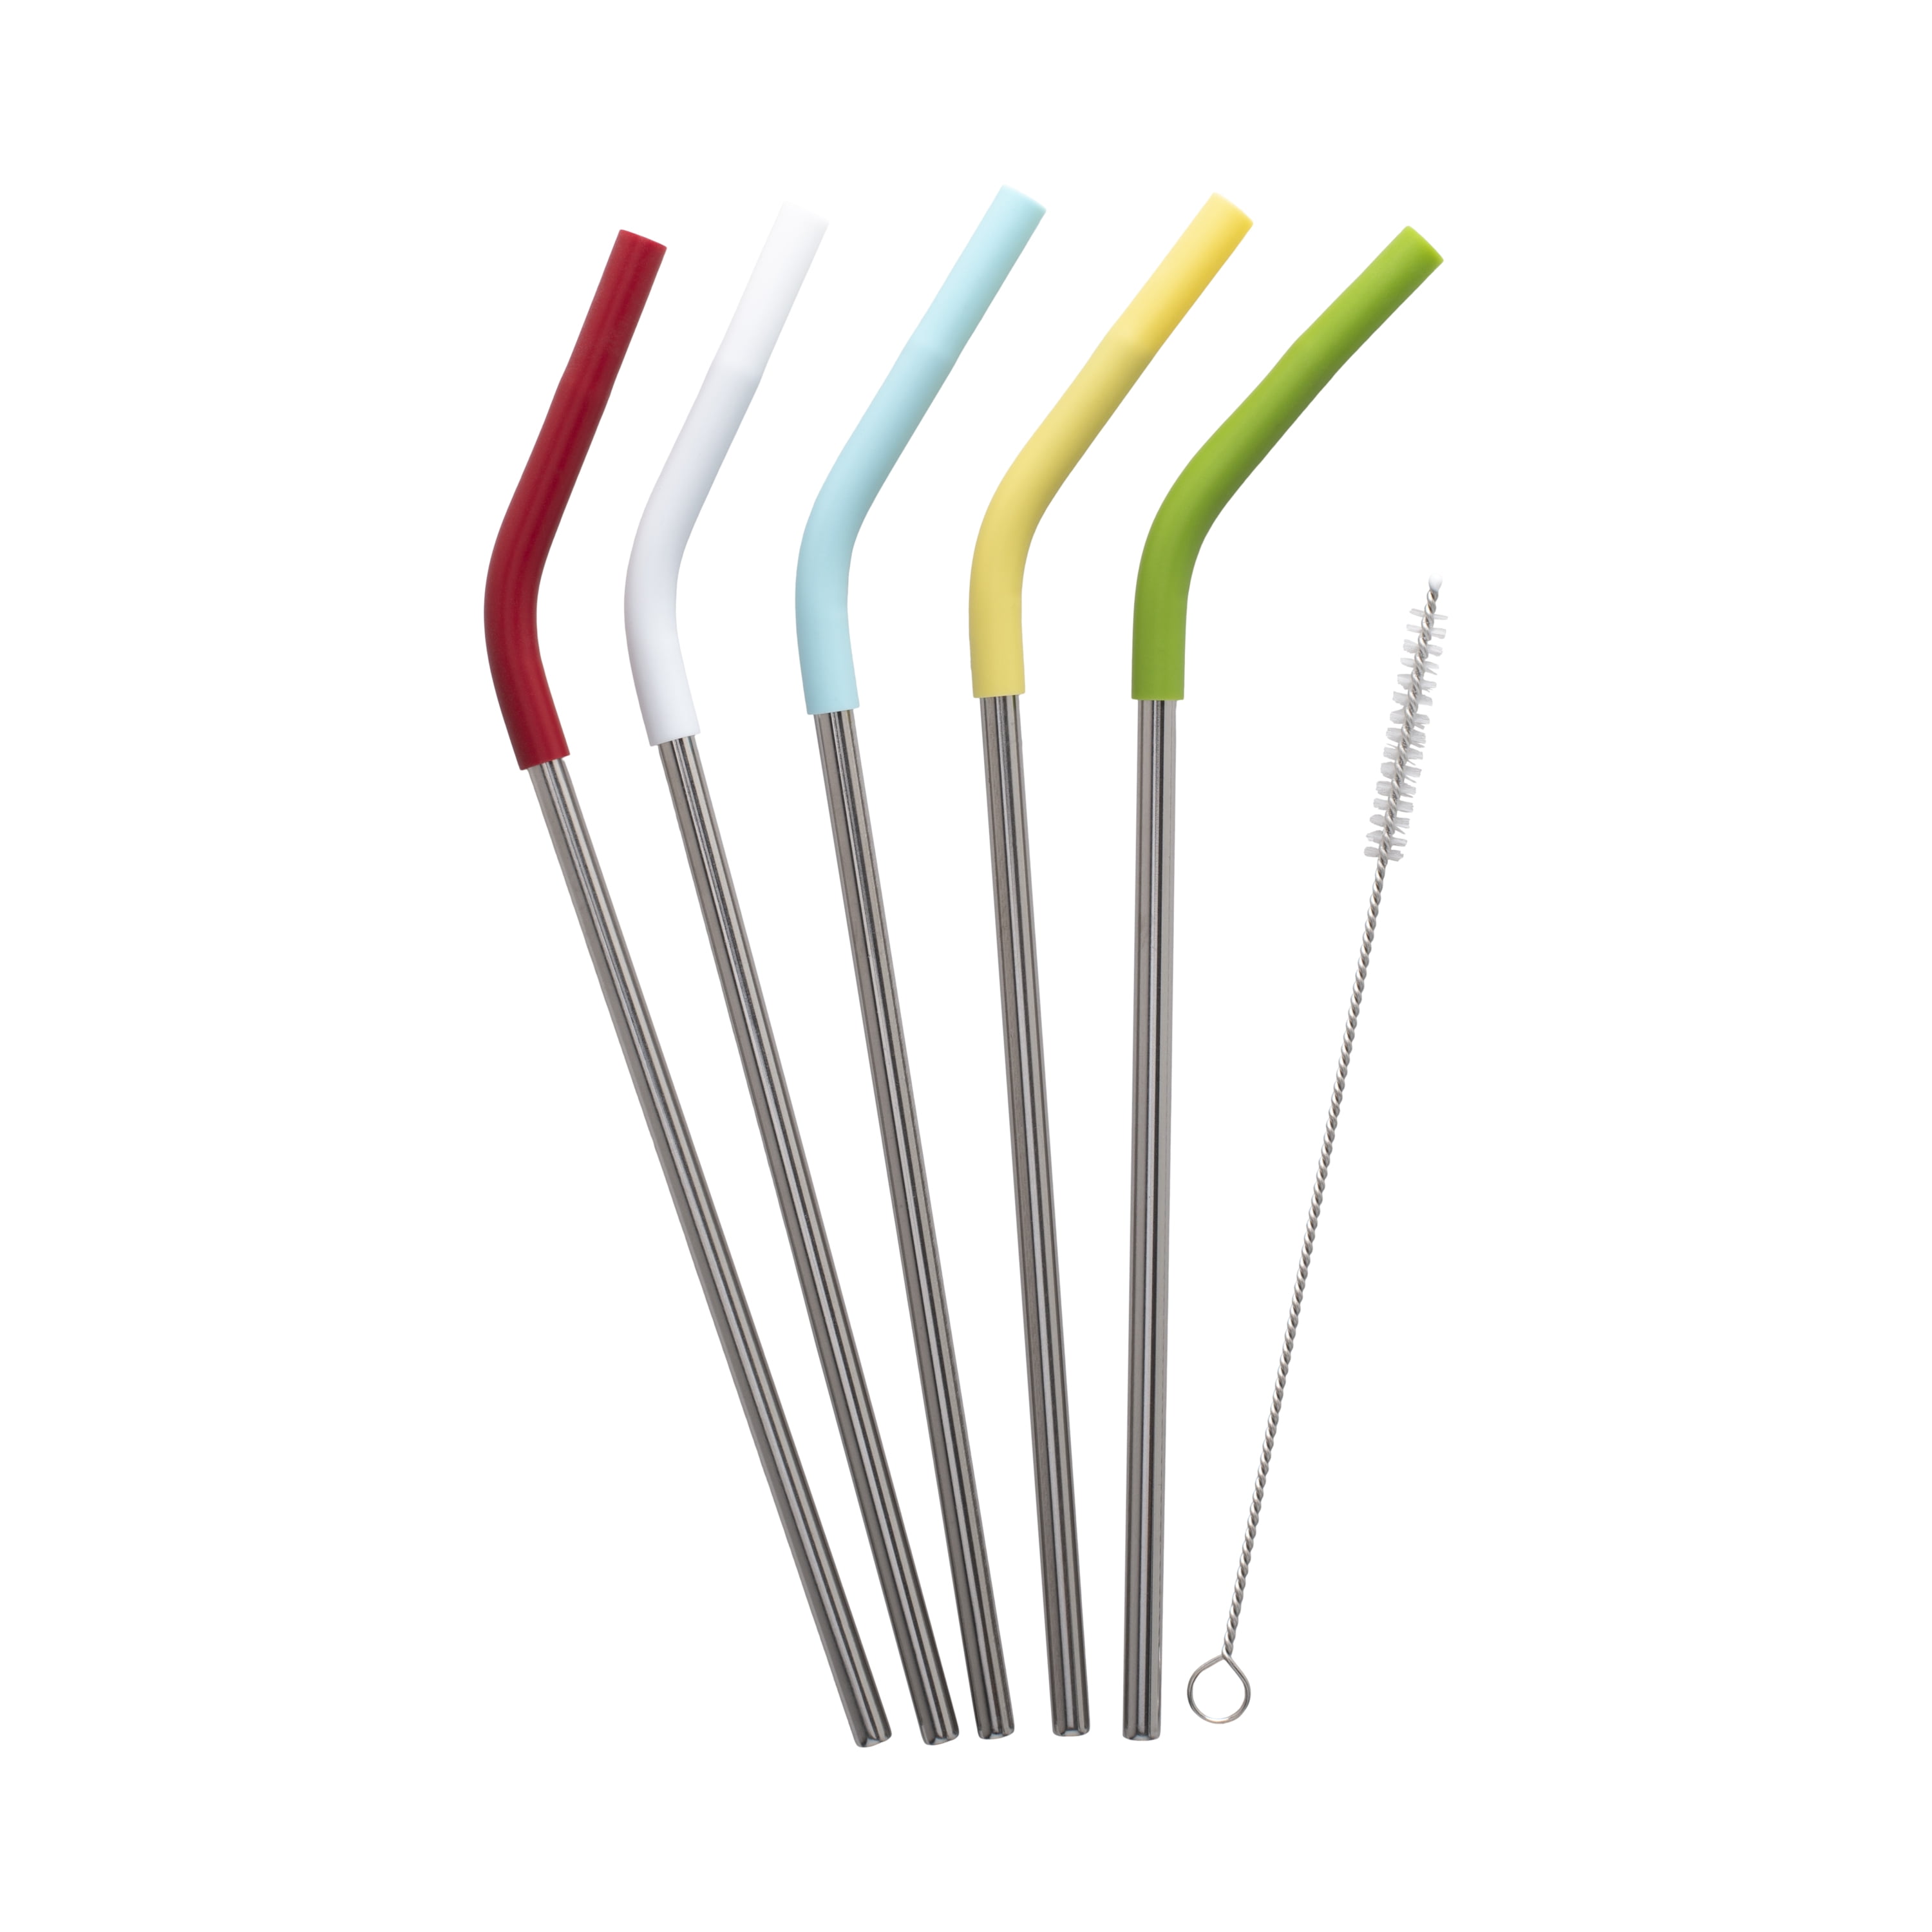 GoodCook Profreshionals Stainless Steel Reusable Straws with Cleaning Brush, Pack of 5